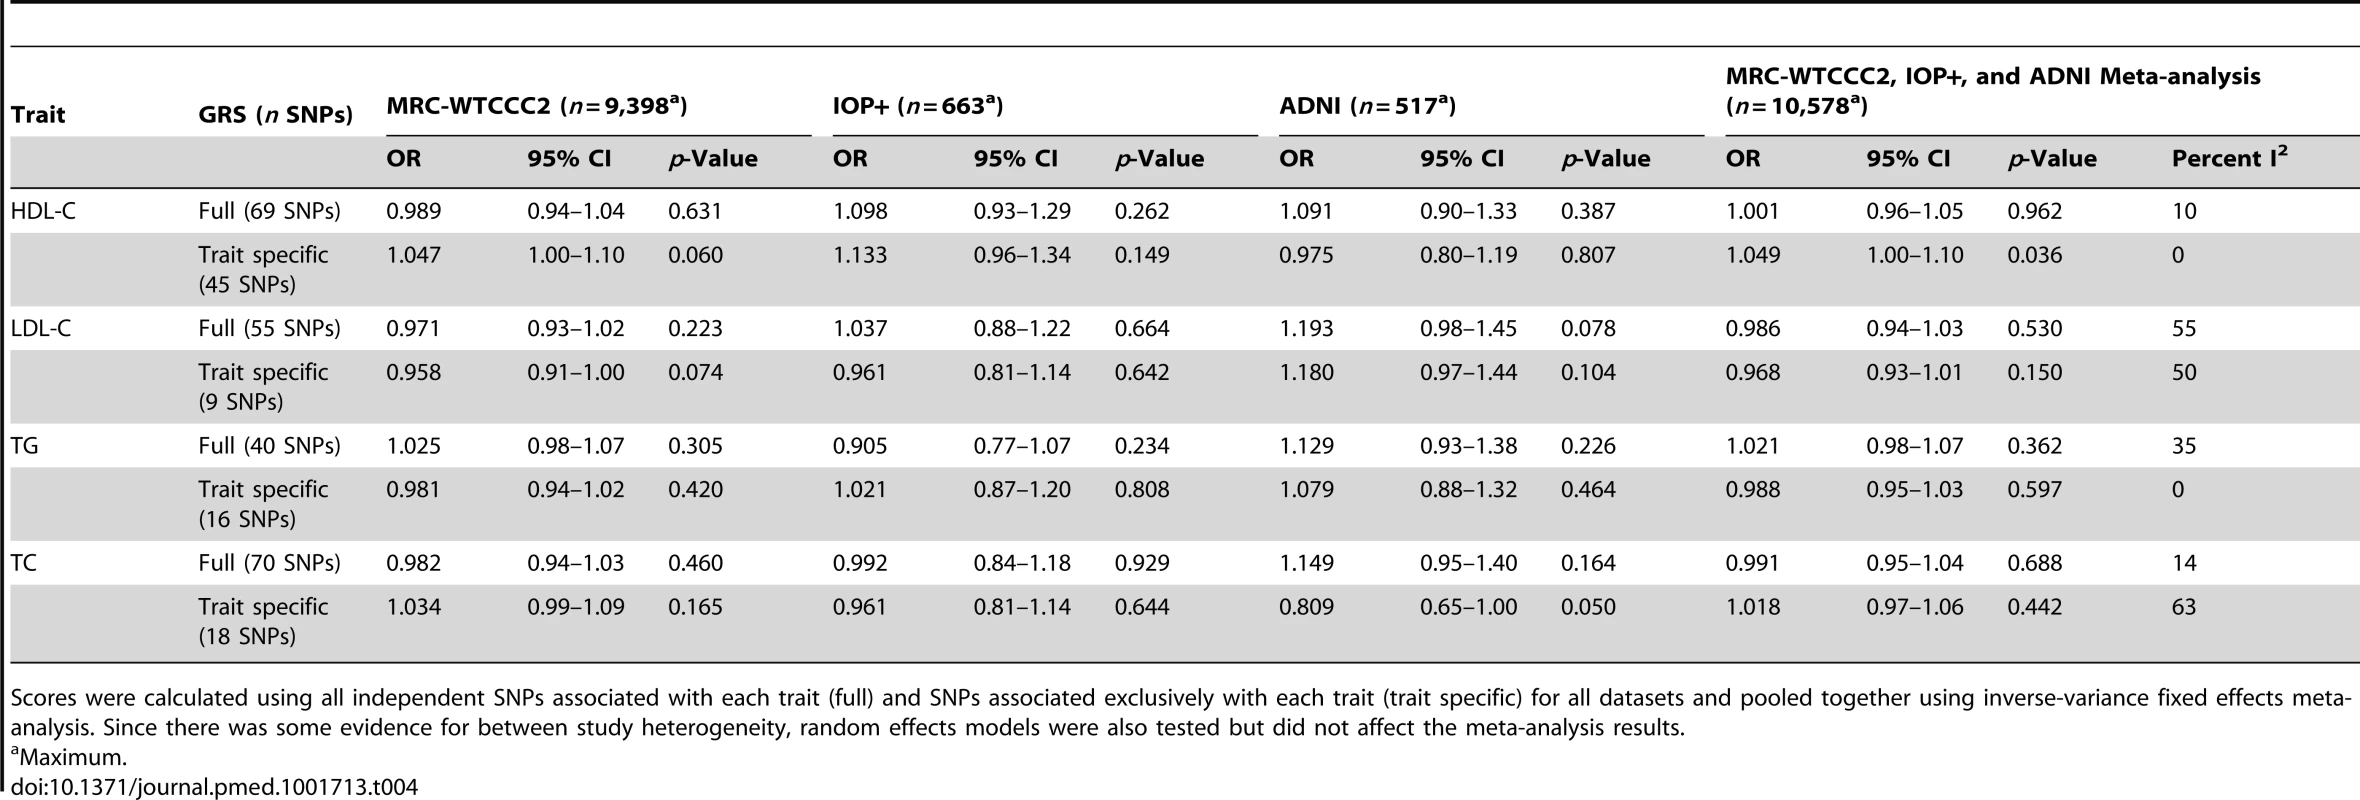 Association of lipid genotype risk scores with LOAD per lipid score SD using individual level data (stage 1 equation).